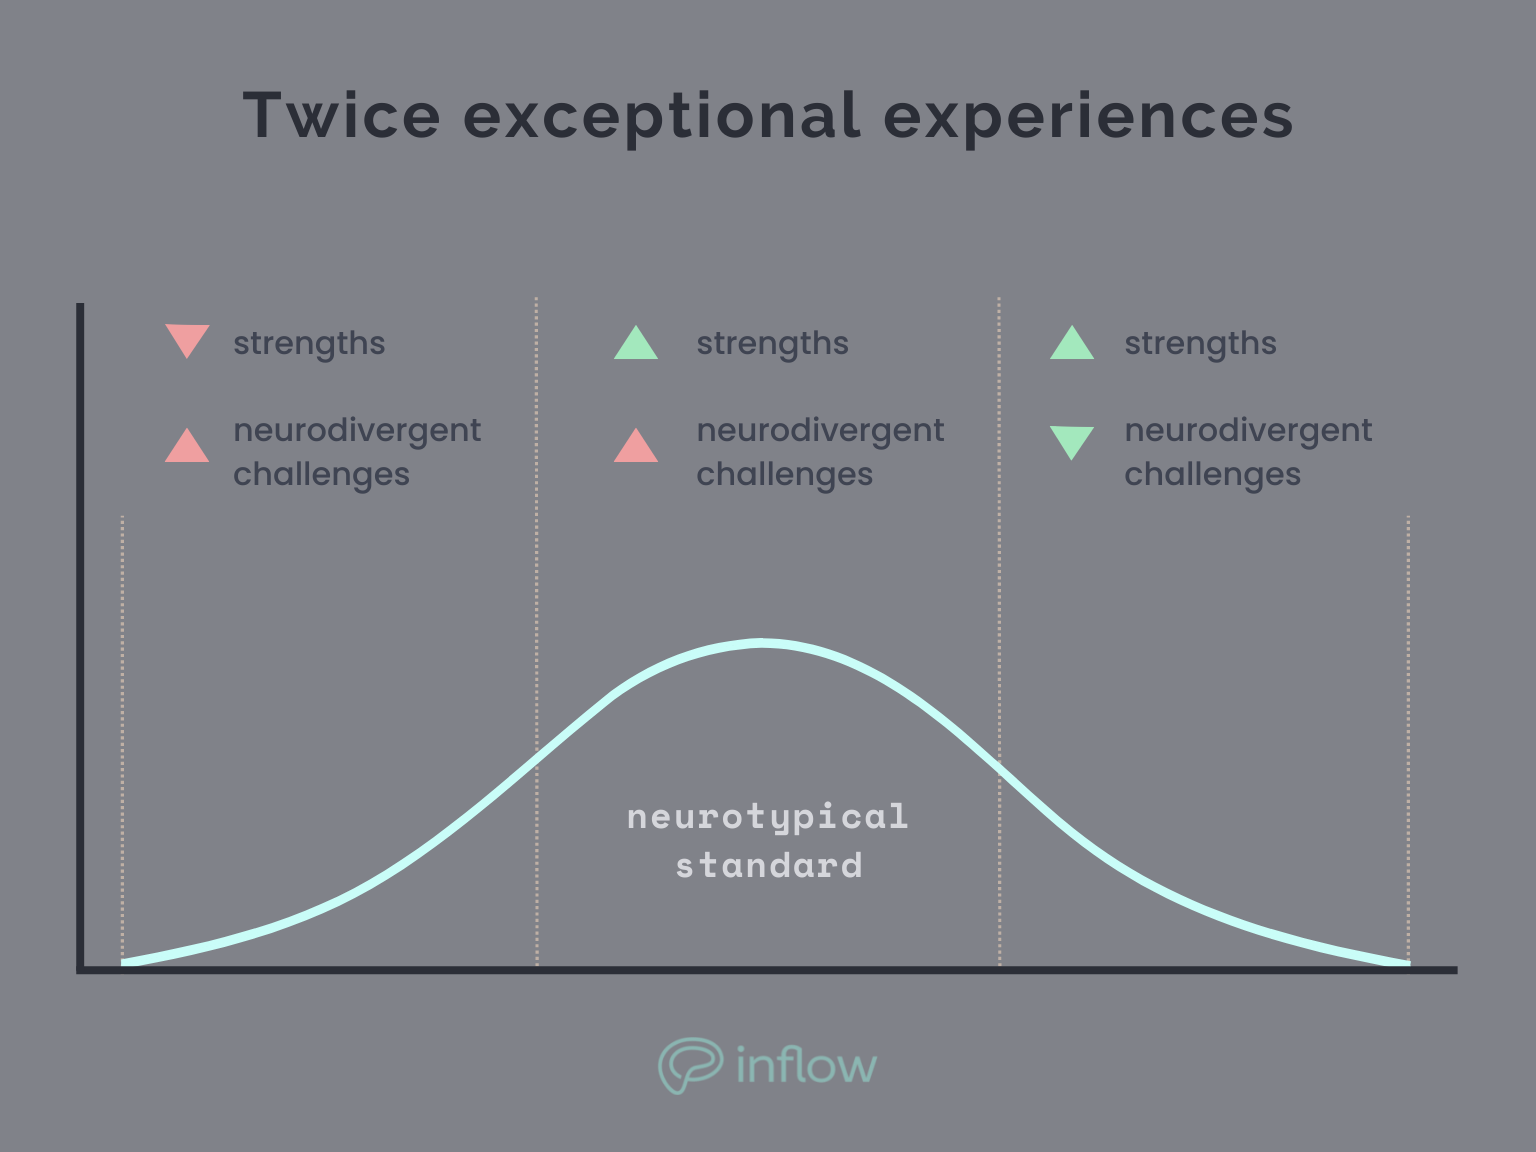 Bell graph titled "twice exceptional experiences". The far left shows low strengths and high neurodivergent challenges. the far right shows high strengths and low neurodivergent challenges, and the middle is labeled "neurotypical standard" and  has high strengths and high neurodivergent challenges.